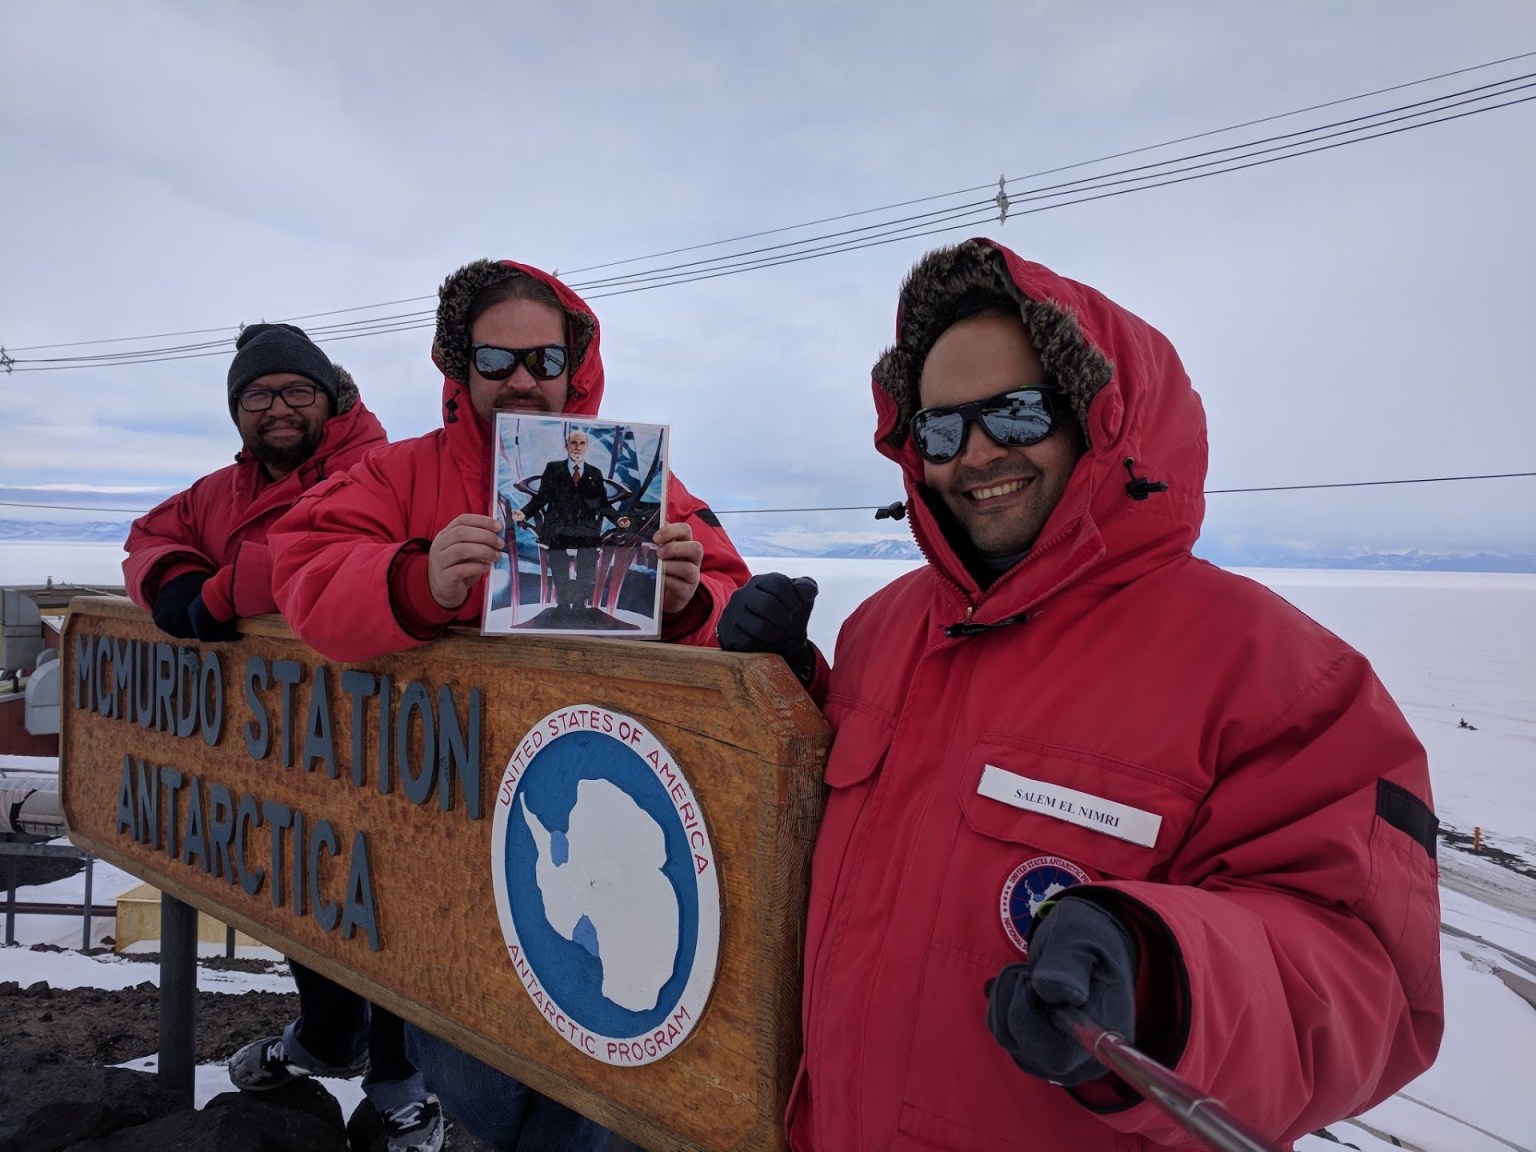 Taken at the National Science Foundation’s McMurdo Station in Antarctica, this selfie made its way to the space station on Nov. 20 using a technology called Disruption Tolerant Networking (DTN).